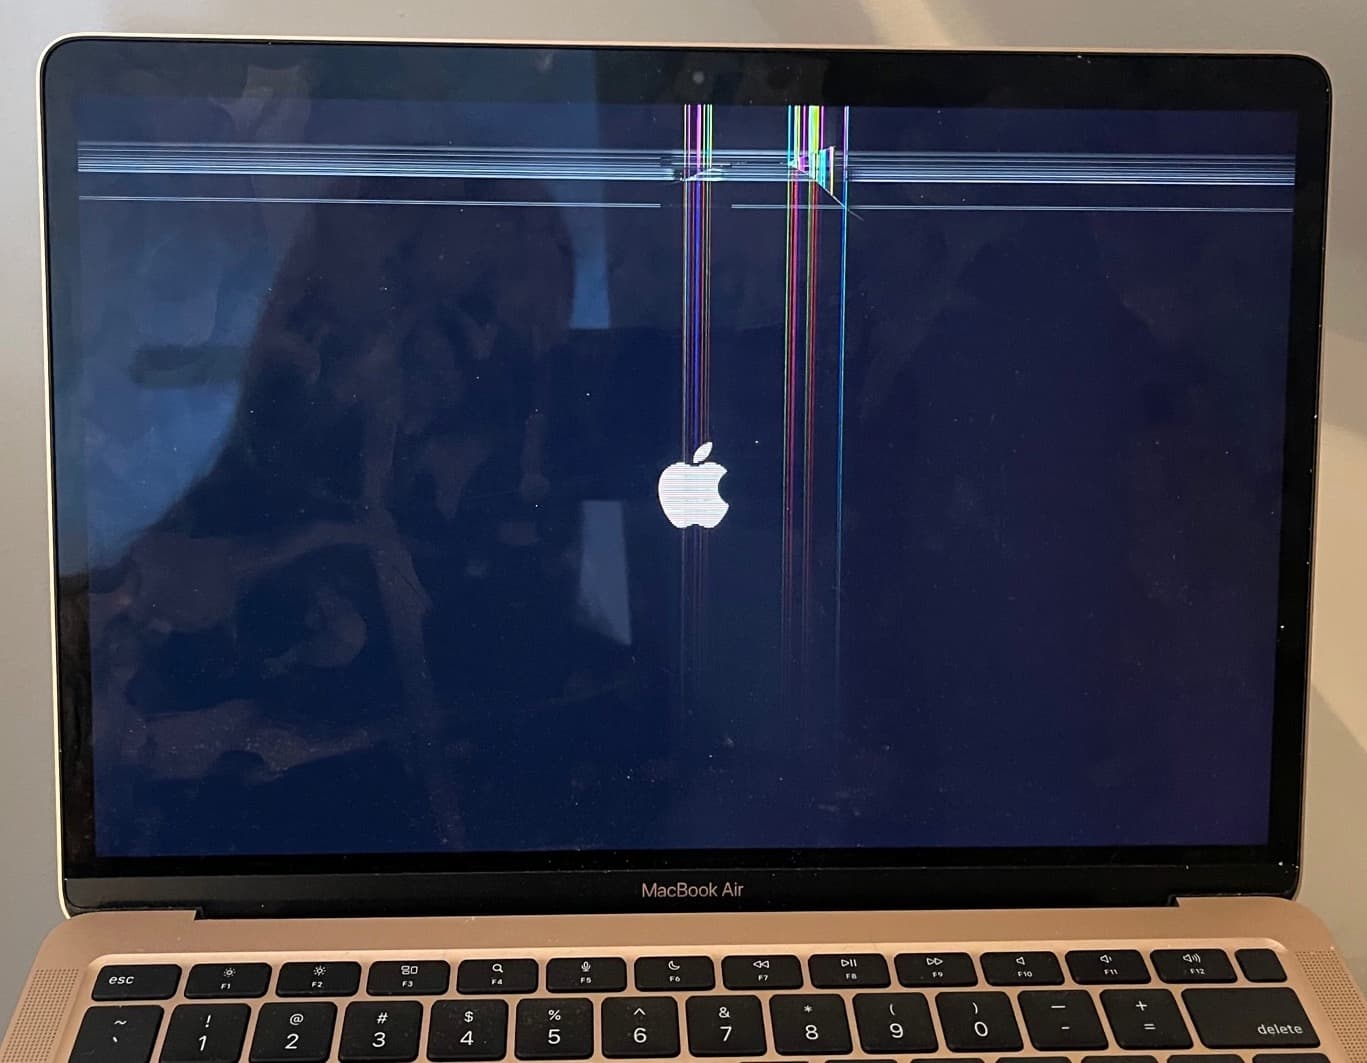 A2337 MacBook air with a hairline crack at the top of the screen causing horizontal and vertical lines.